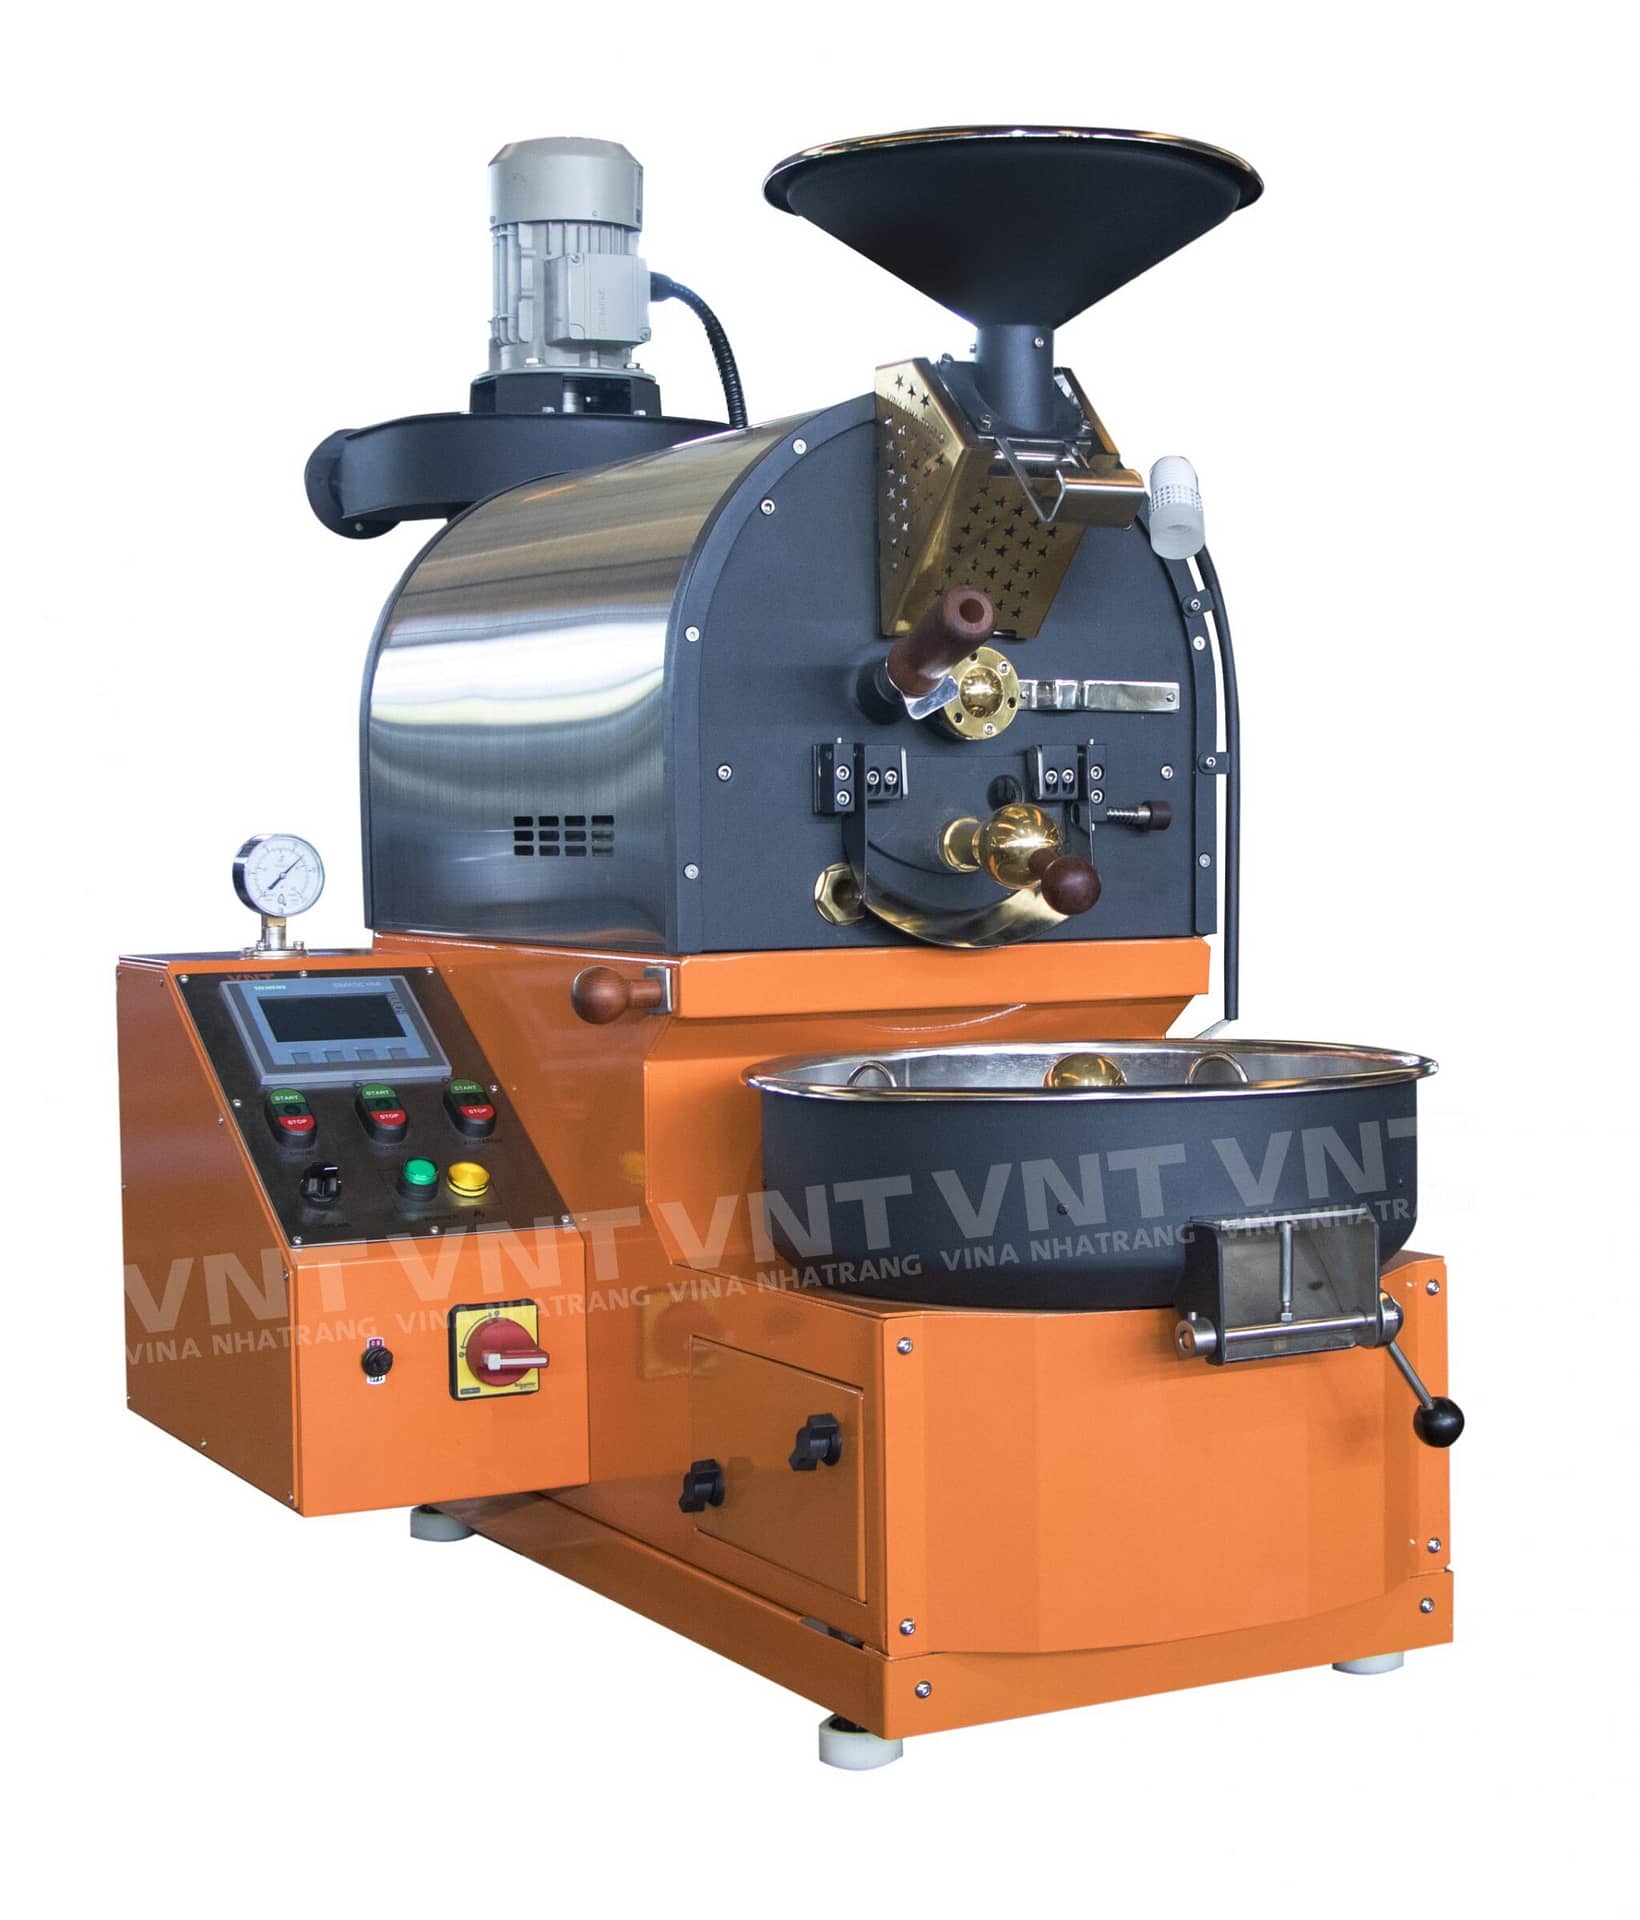 VNT's Commercial Coffee Roaster